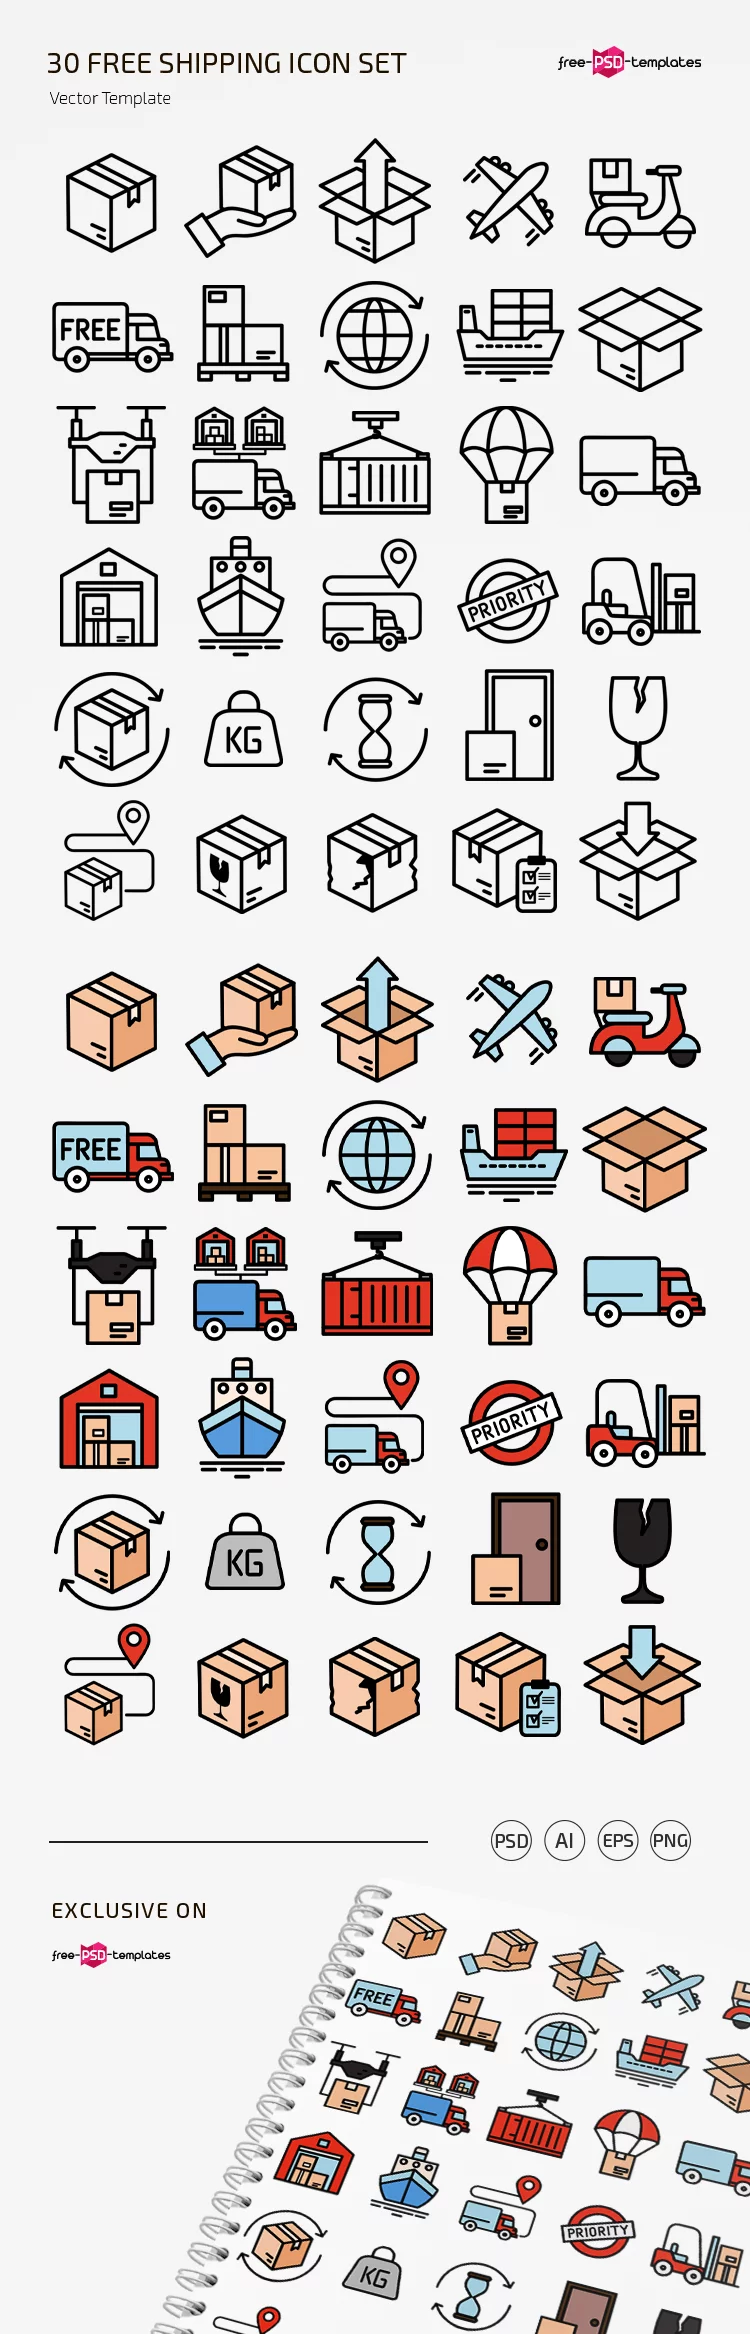 Free Shipping Vector Icon Set in EPS + PSD